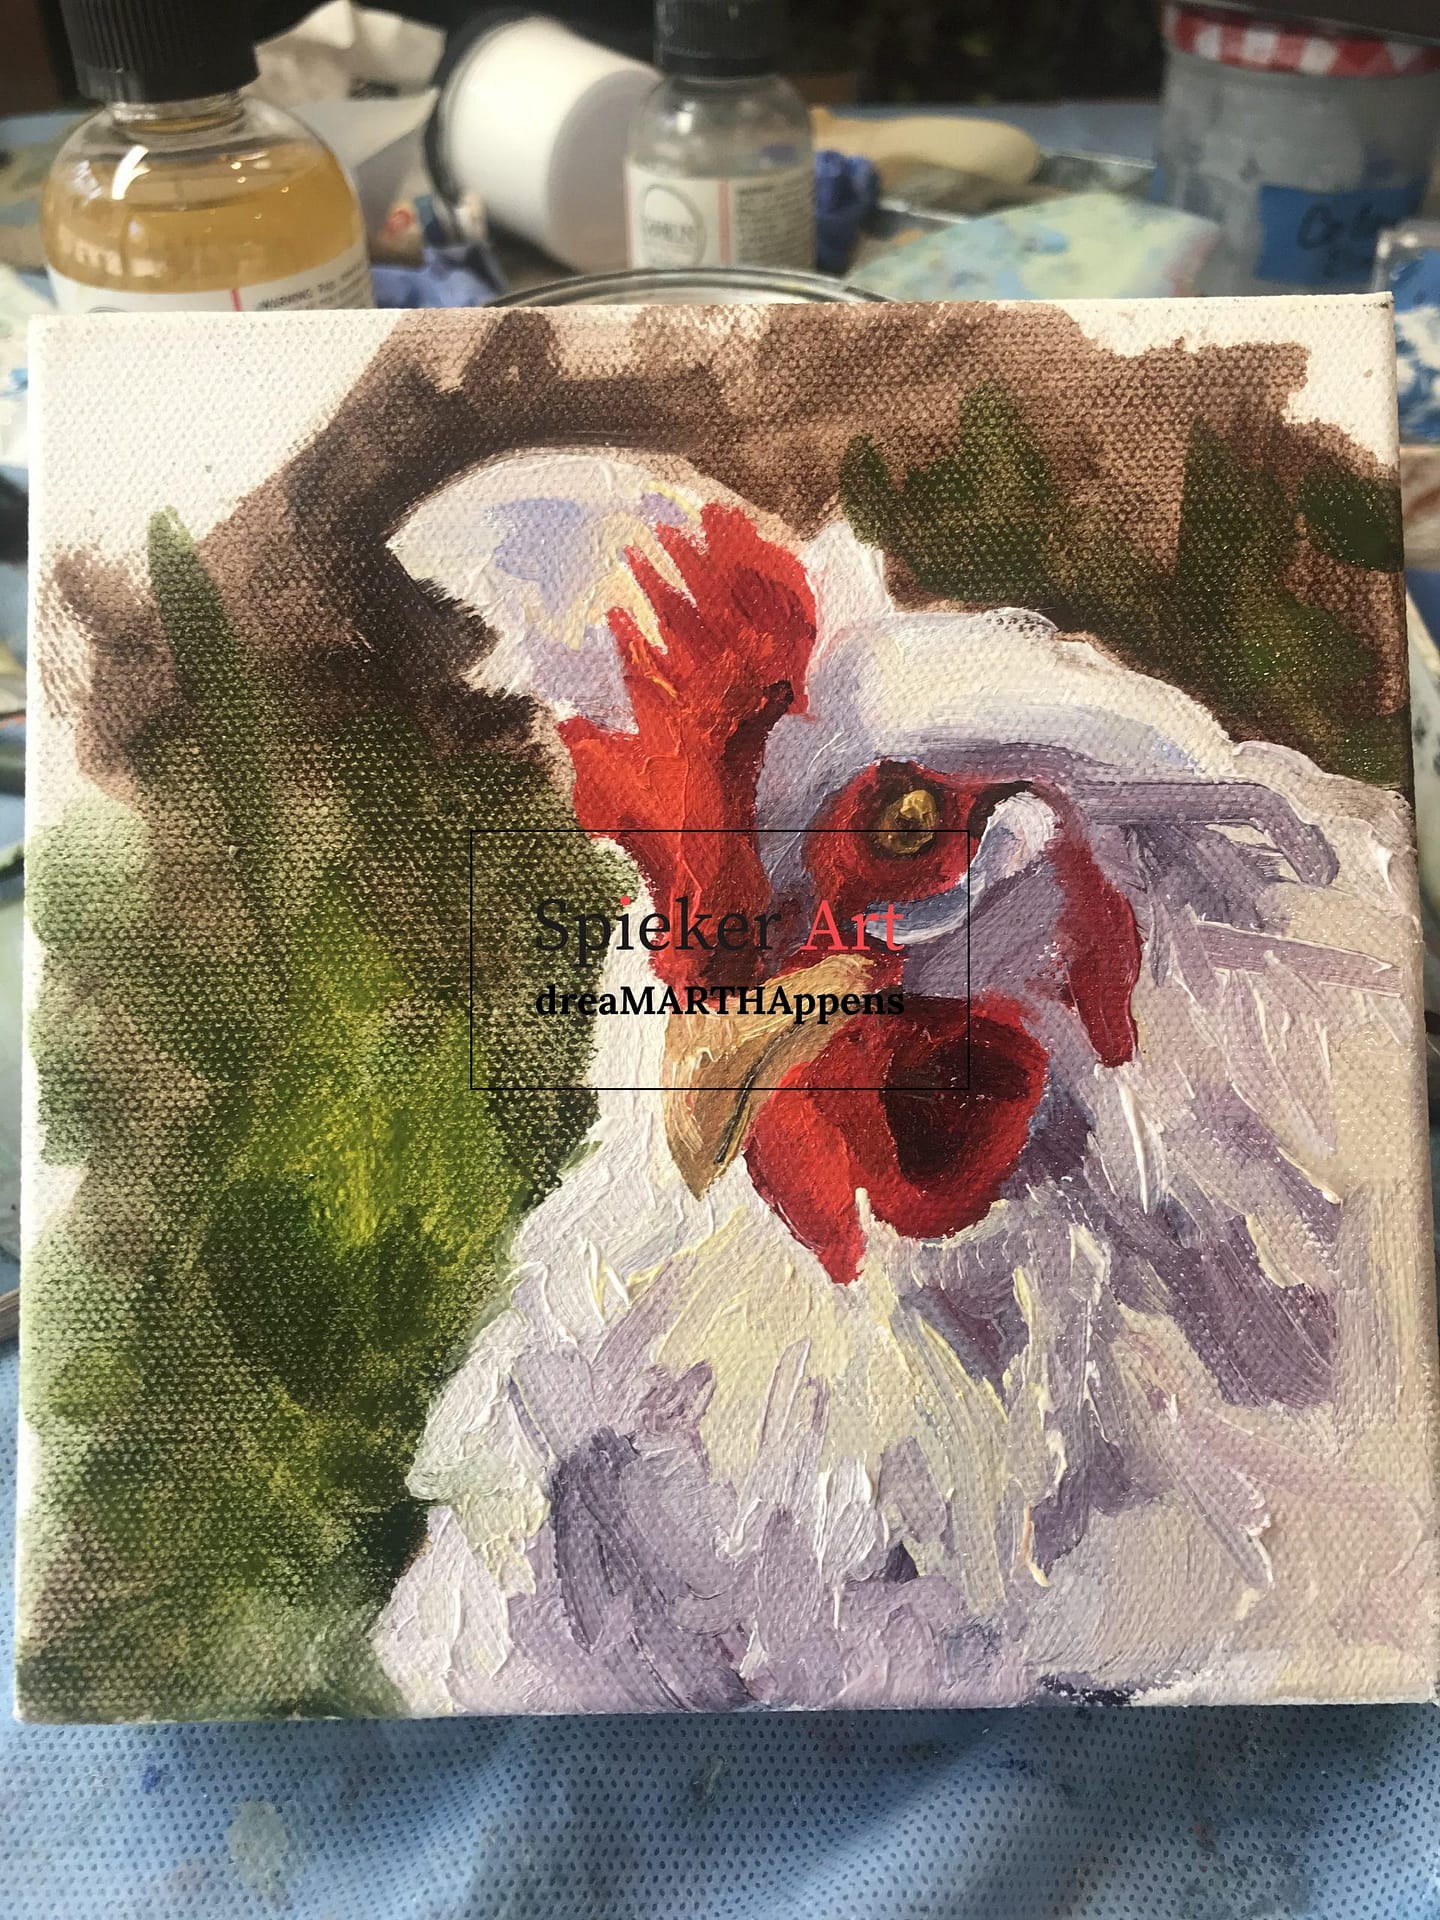 oil painting of a white chicken with a red comb